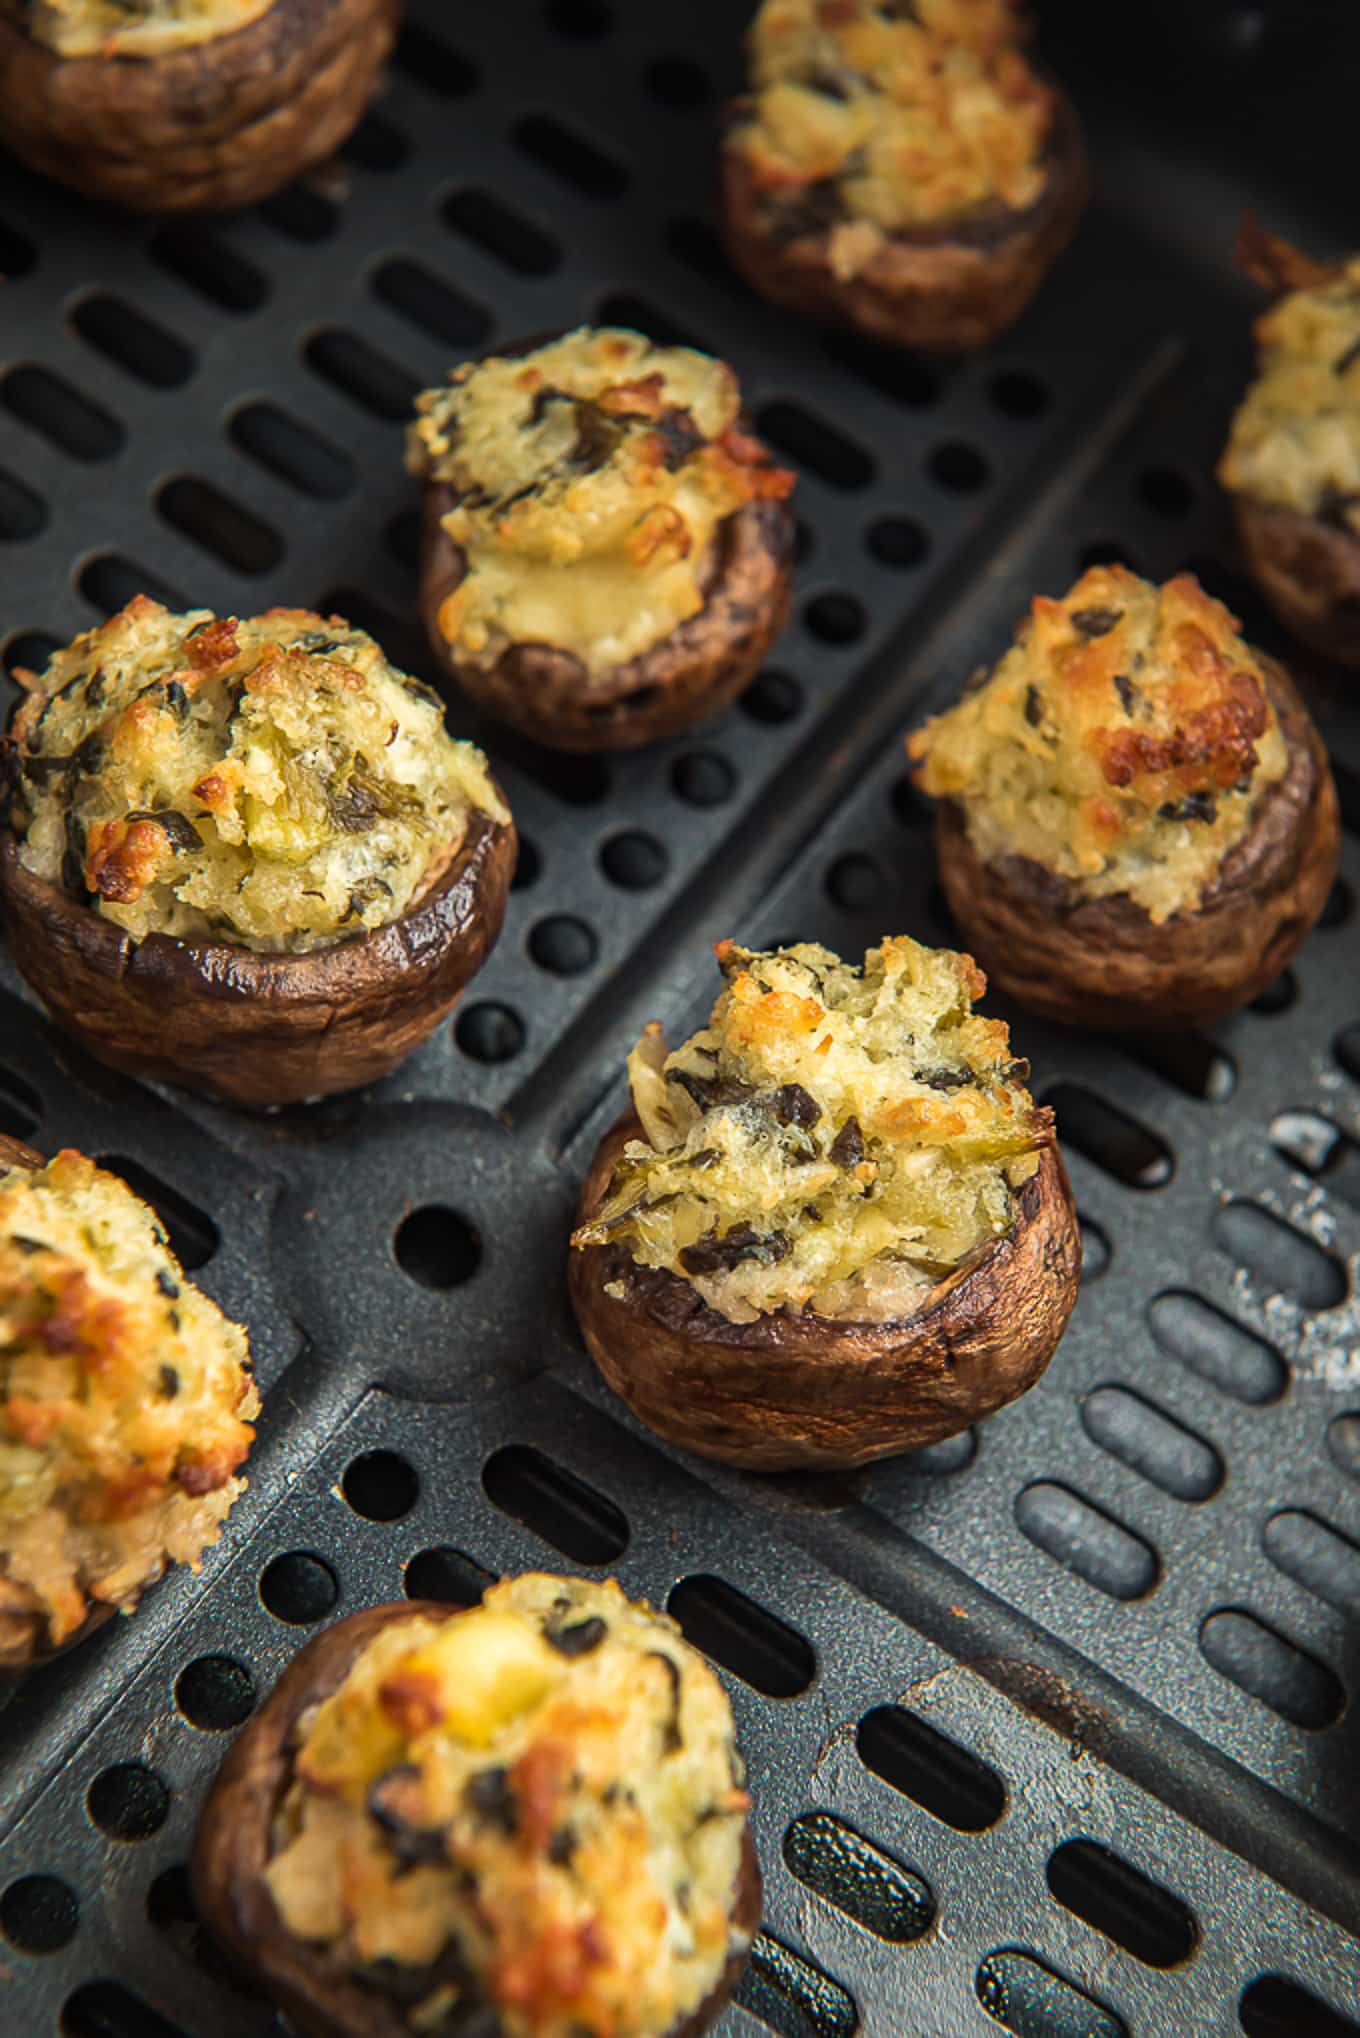 Cream cheese stuffed mushrooms in the air fryer right after cooking.